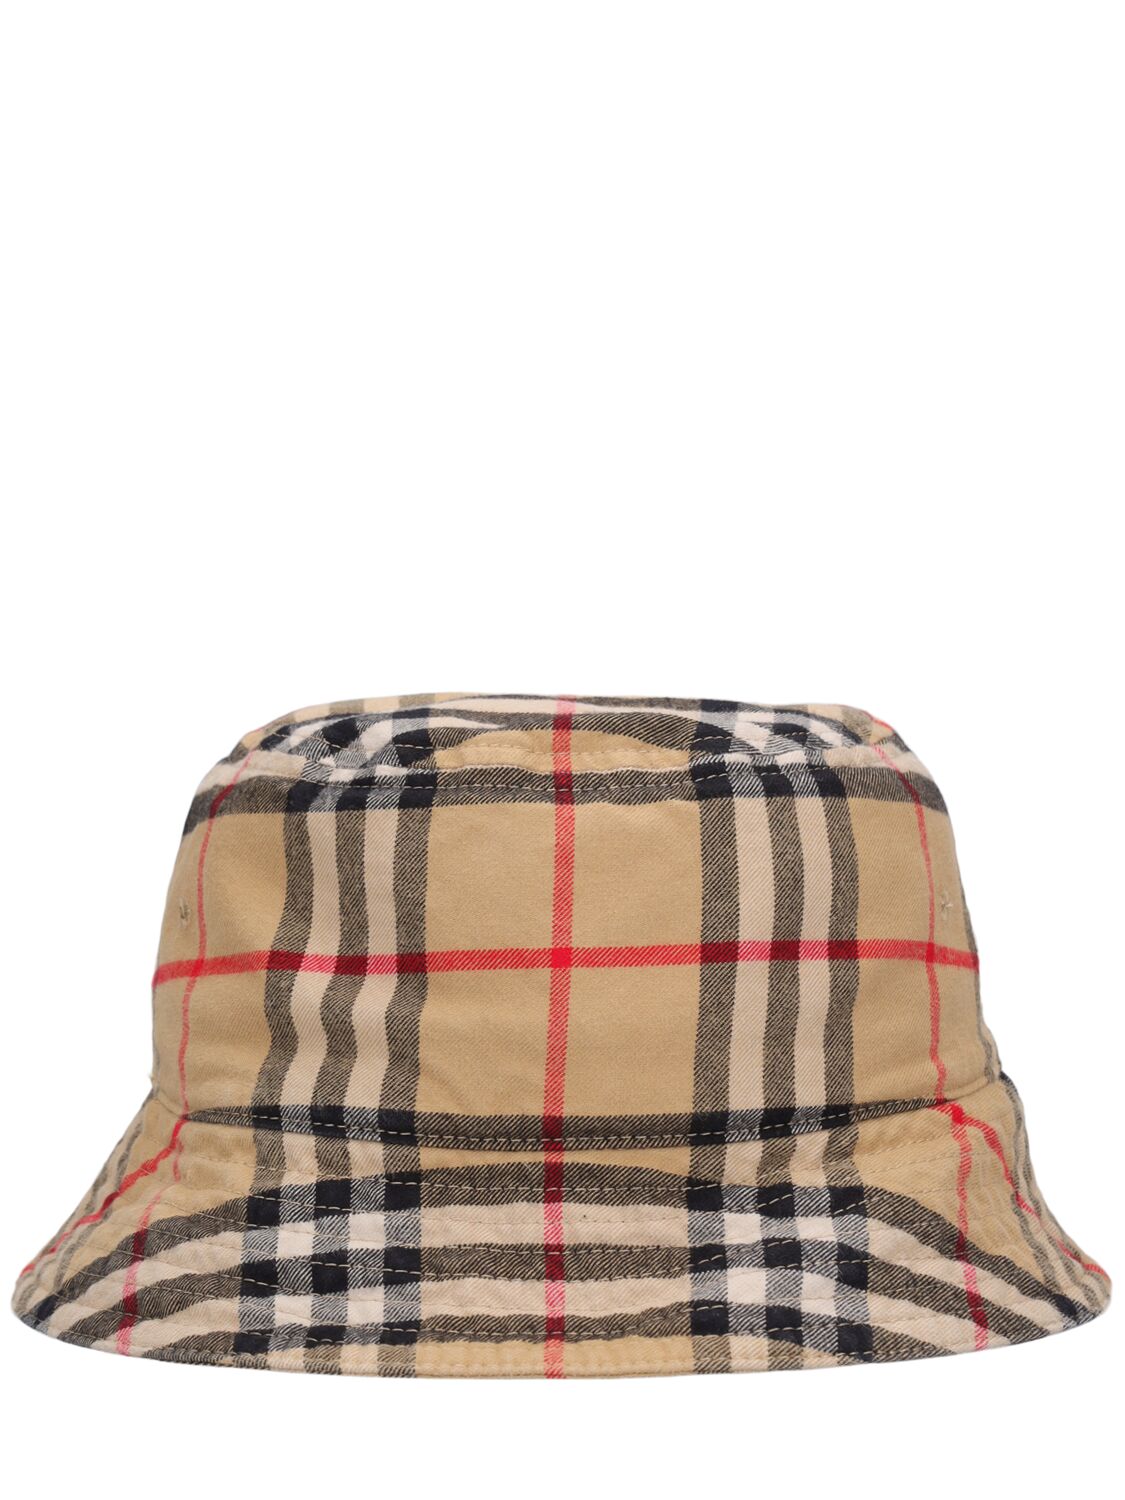 Burberry Archive Check Bucket Hat In Archive Beige